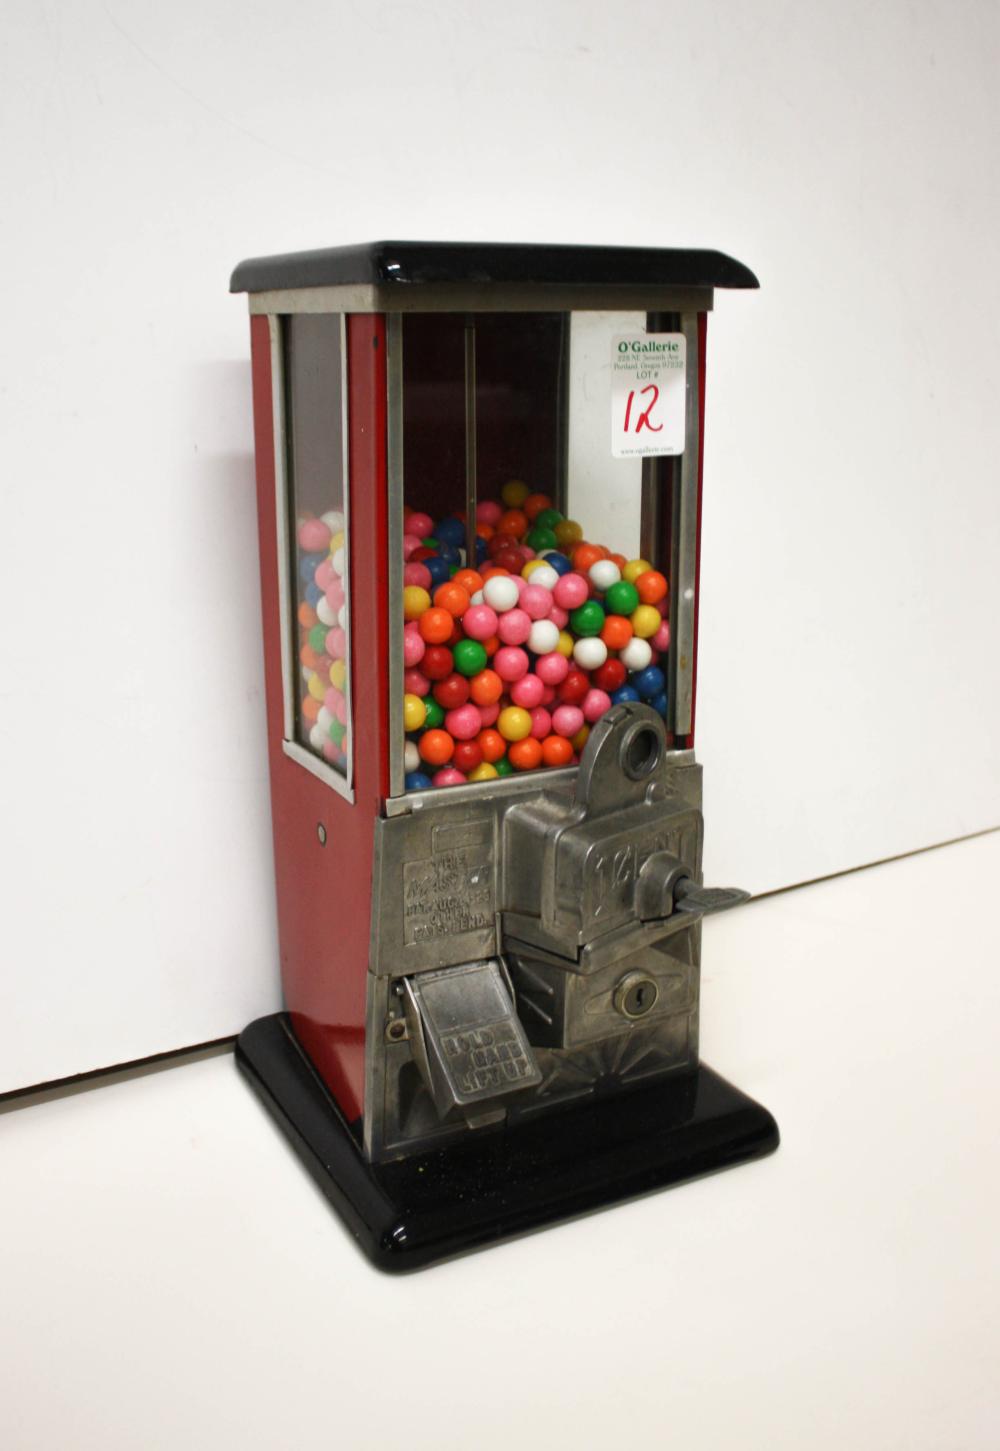 VINTAGE PENNY GUMBALL MACHINE, THE